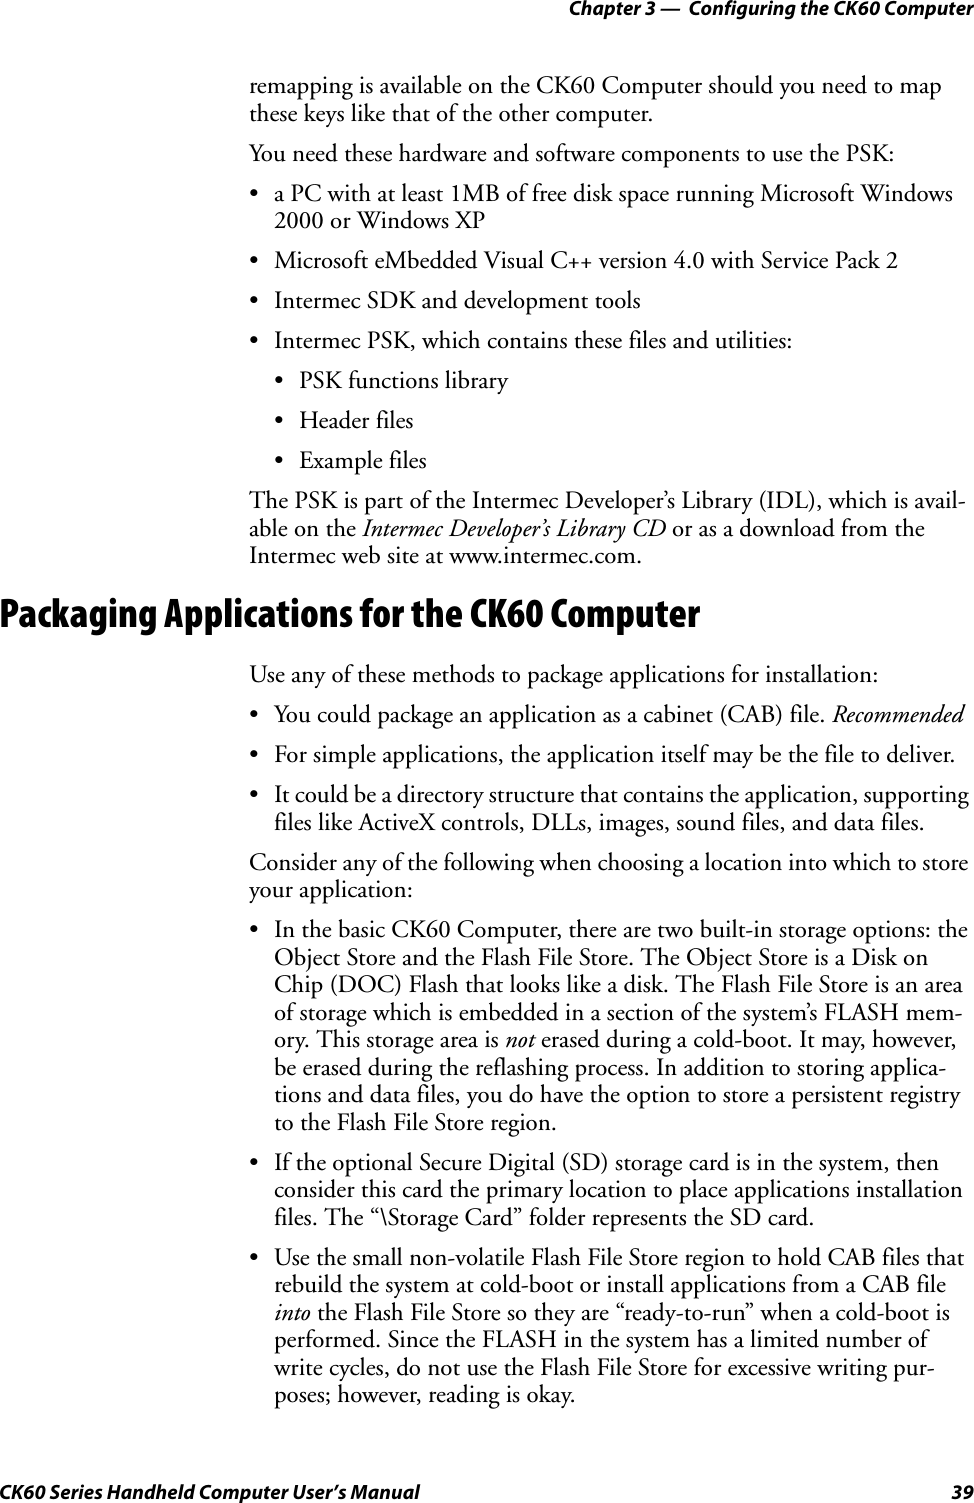 Chapter 3 —  Configuring the CK60 ComputerCK60 Series Handheld Computer User’s Manual 39remapping is available on the CK60 Computer should you need to map these keys like that of the other computer.You need these hardware and software components to use the PSK:• a PC with at least 1MB of free disk space running Microsoft Windows 2000 or Windows XP• Microsoft eMbedded Visual C++ version 4.0 with Service Pack 2• Intermec SDK and development tools• Intermec PSK, which contains these files and utilities:• PSK functions library• Header files• Example filesThe PSK is part of the Intermec Developer’s Library (IDL), which is avail-able on the Intermec Developer’s Library CD or as a download from the Intermec web site at www.intermec.com.Packaging Applications for the CK60 ComputerUse any of these methods to package applications for installation:• You could package an application as a cabinet (CAB) file. Recommended• For simple applications, the application itself may be the file to deliver.• It could be a directory structure that contains the application, supporting files like ActiveX controls, DLLs, images, sound files, and data files.Consider any of the following when choosing a location into which to store your application:• In the basic CK60 Computer, there are two built-in storage options: the Object Store and the Flash File Store. The Object Store is a Disk on Chip (DOC) Flash that looks like a disk. The Flash File Store is an area of storage which is embedded in a section of the system’s FLASH mem-ory. This storage area is not erased during a cold-boot. It may, however, be erased during the reflashing process. In addition to storing applica-tions and data files, you do have the option to store a persistent registry to the Flash File Store region.• If the optional Secure Digital (SD) storage card is in the system, then consider this card the primary location to place applications installation files. The “\Storage Card” folder represents the SD card.• Use the small non-volatile Flash File Store region to hold CAB files that rebuild the system at cold-boot or install applications from a CAB file into the Flash File Store so they are “ready-to-run” when a cold-boot is performed. Since the FLASH in the system has a limited number of write cycles, do not use the Flash File Store for excessive writing pur-poses; however, reading is okay.